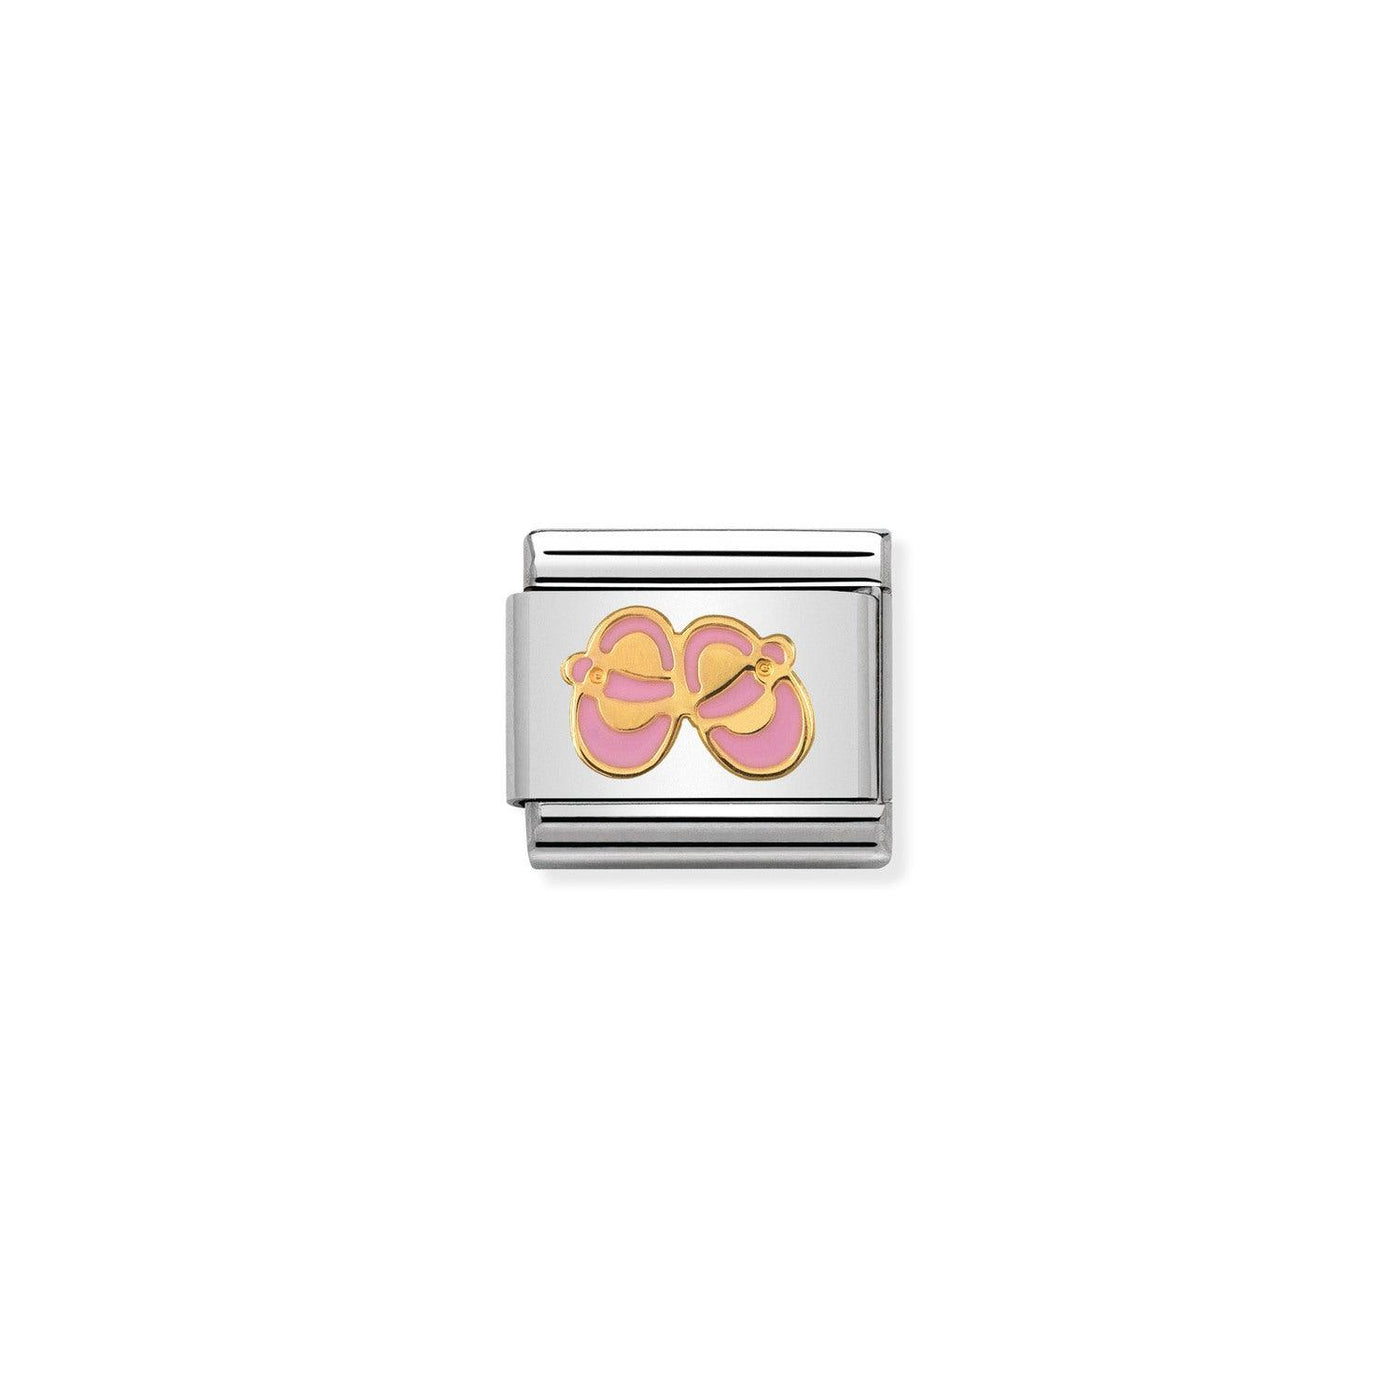 Nomination Classic Gold and Pink Shoes Link Charm